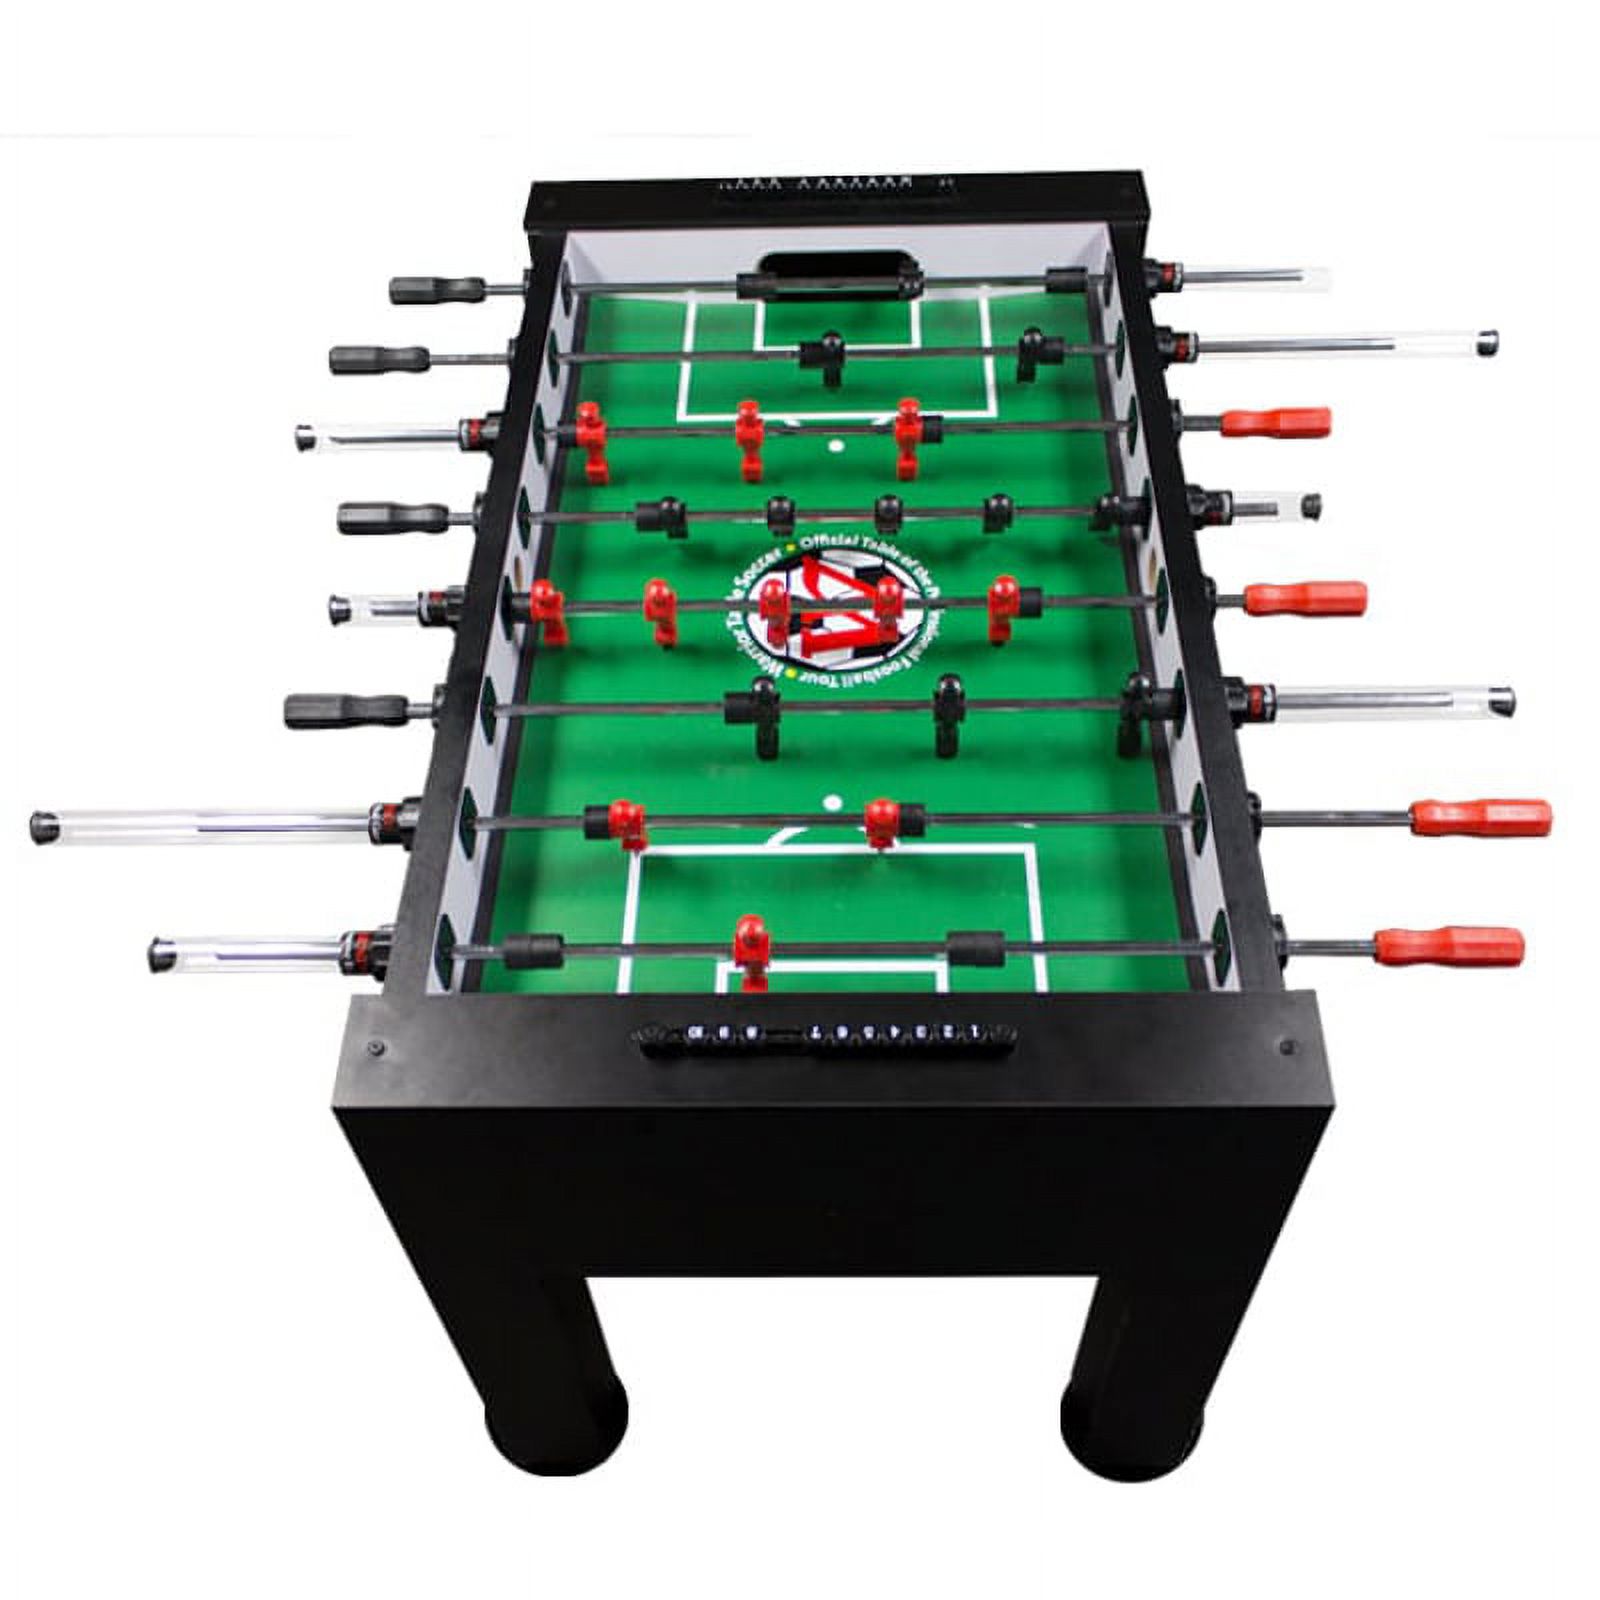 Warrior Table Soccer Professional Foosball Table - image 3 of 7